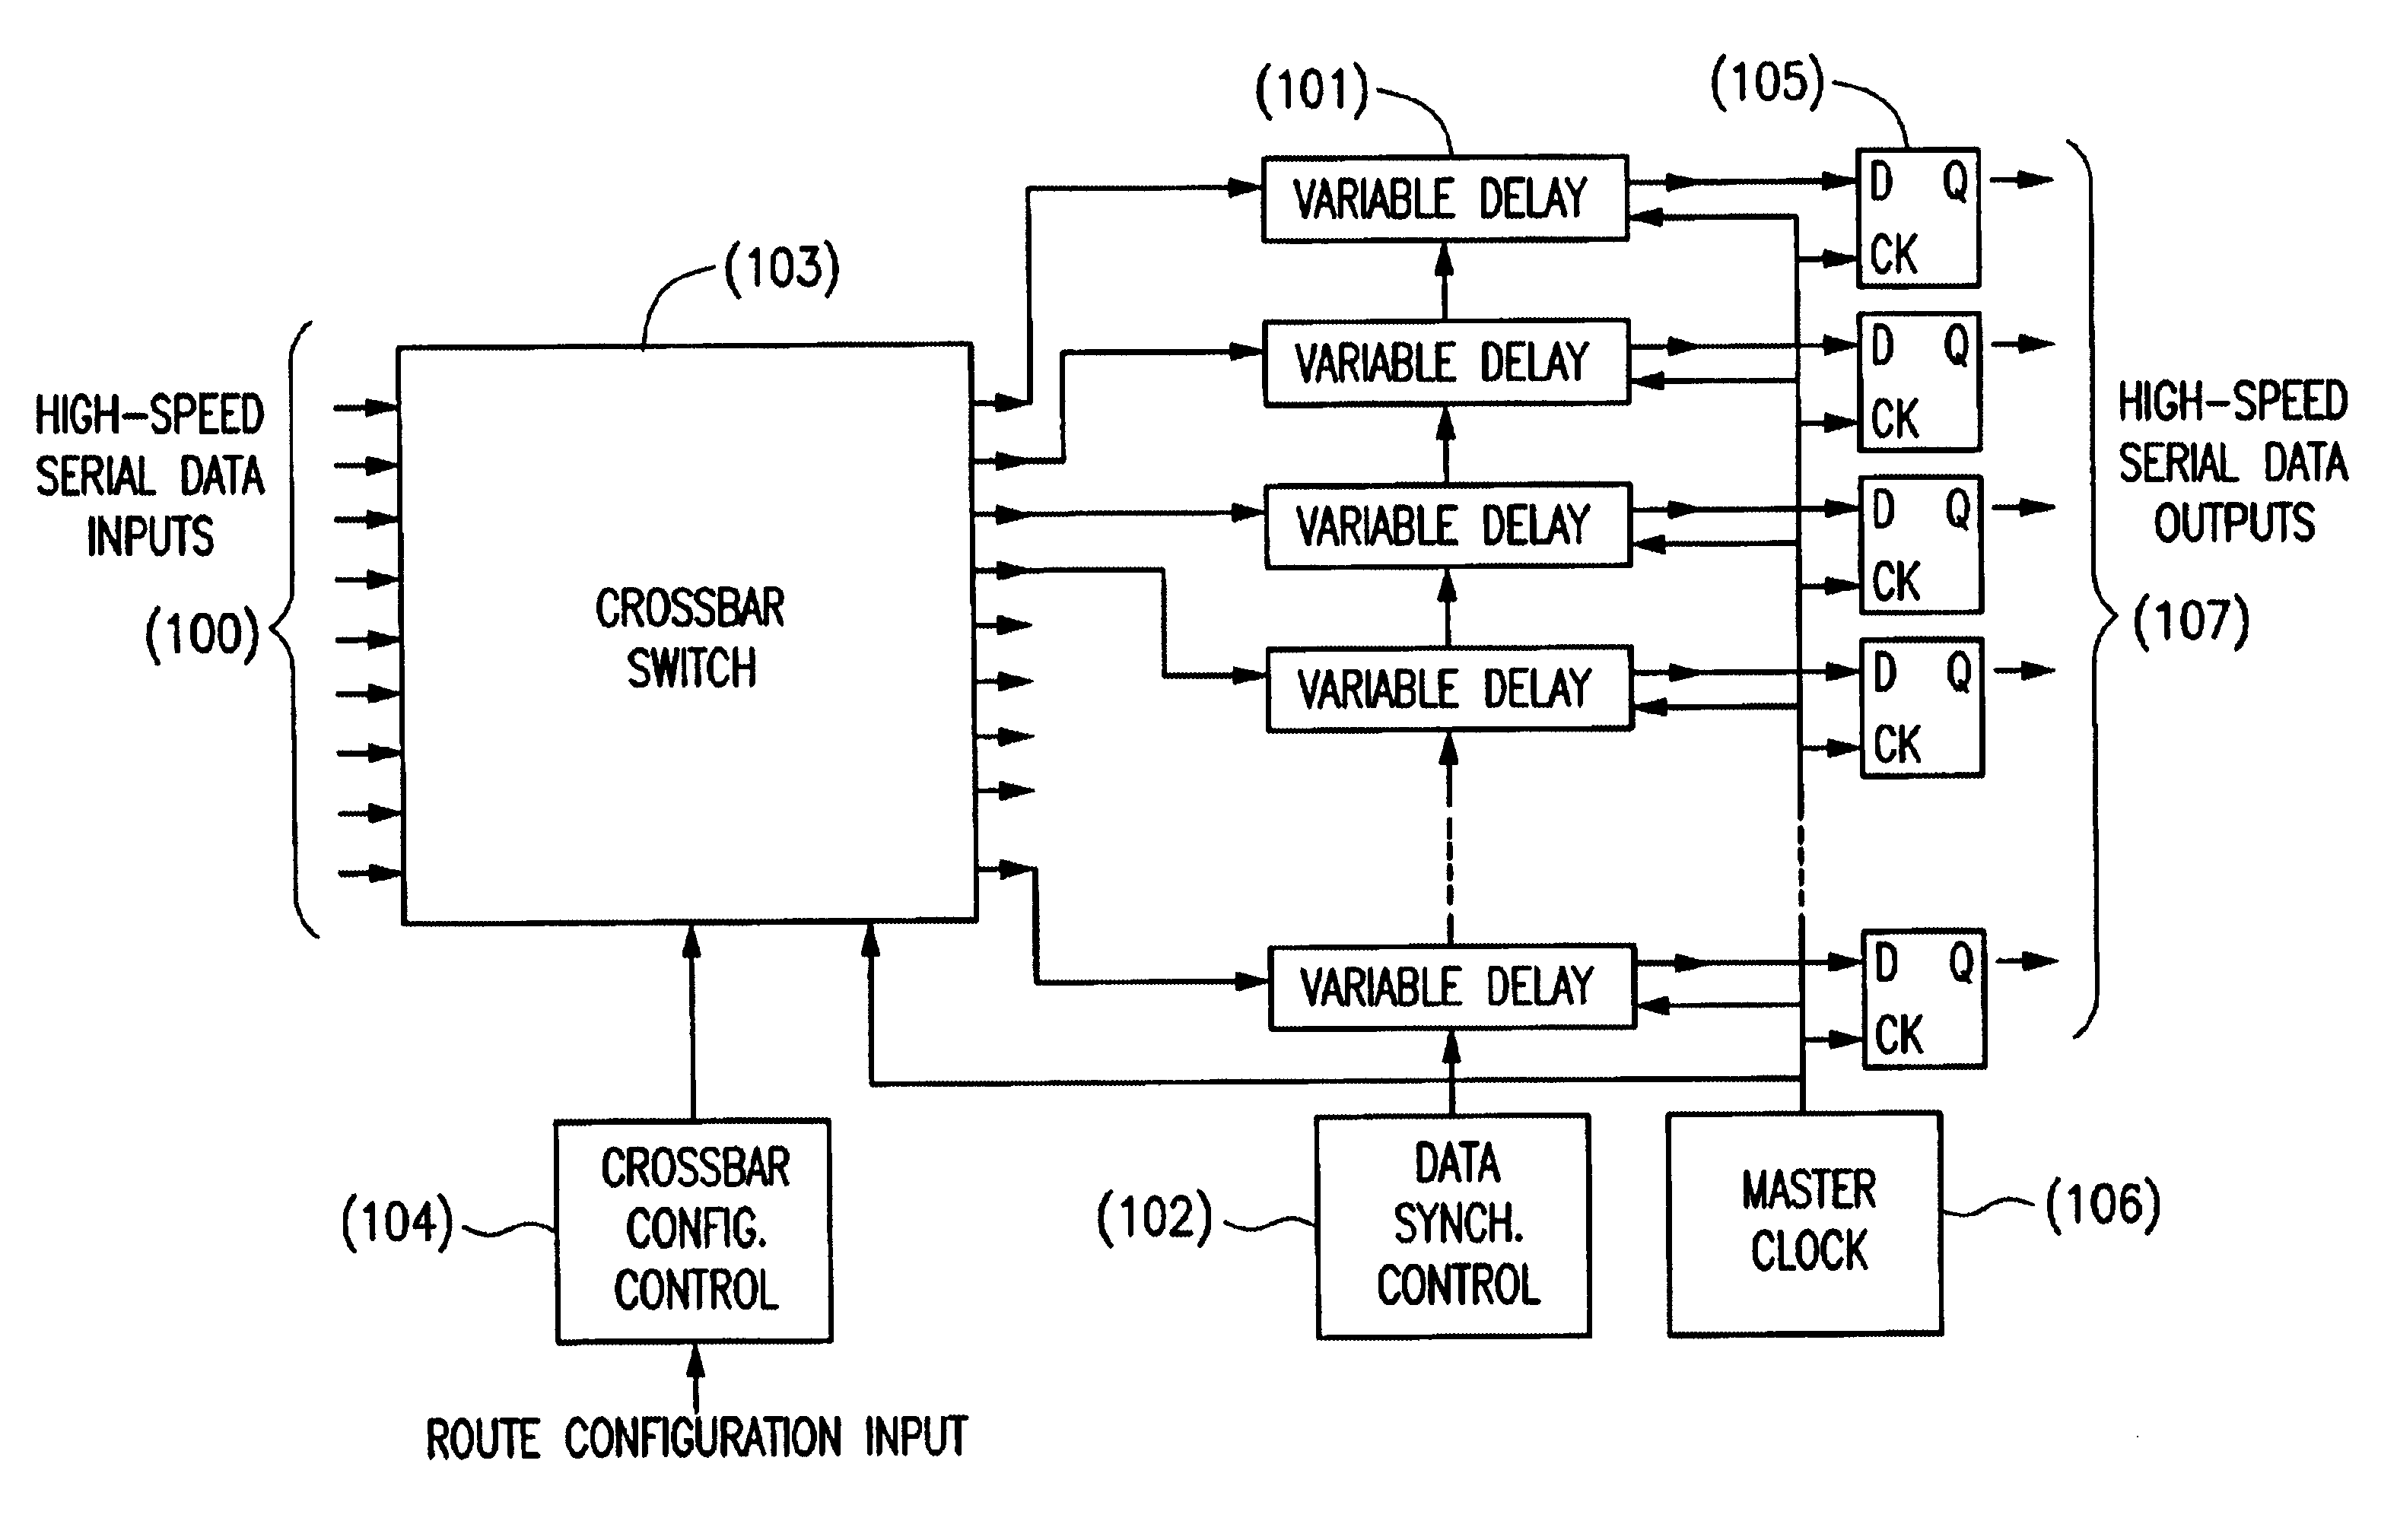 Crossbar switch and control for data networks switching